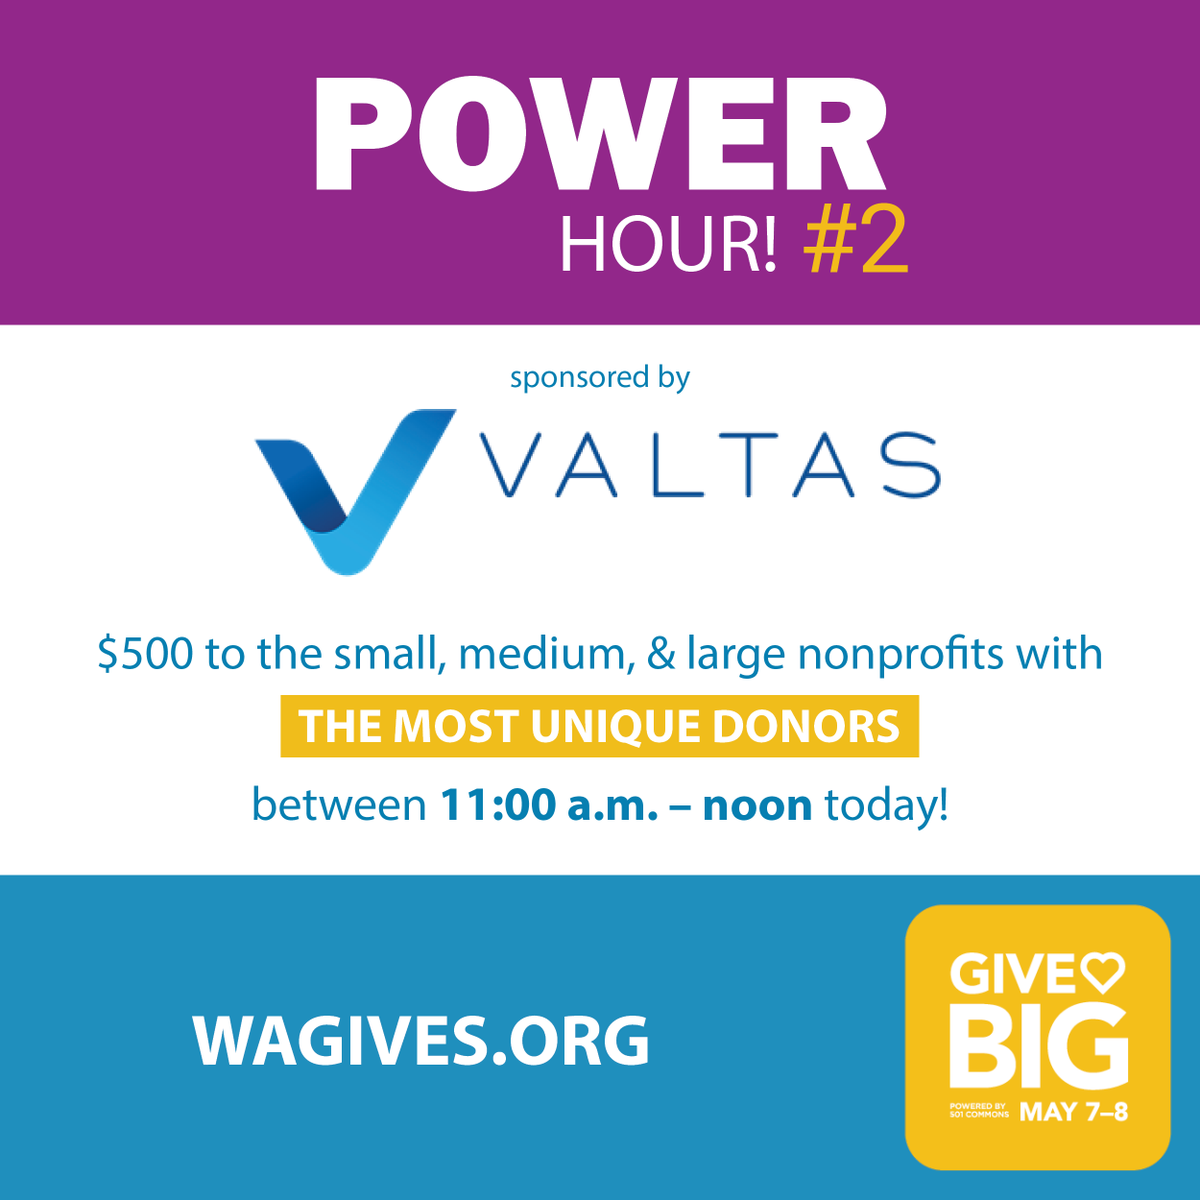 Good morning! We're excited to announce that there's a second Power Hour happening today from 11:00 a.m. to noon sponsored by the Valtas Group. They're giving a $500 prize to the #GiveBIG organizations with the most unique donors! #ThatGivingFeeling wagives.org/p/ValtasPowerH…